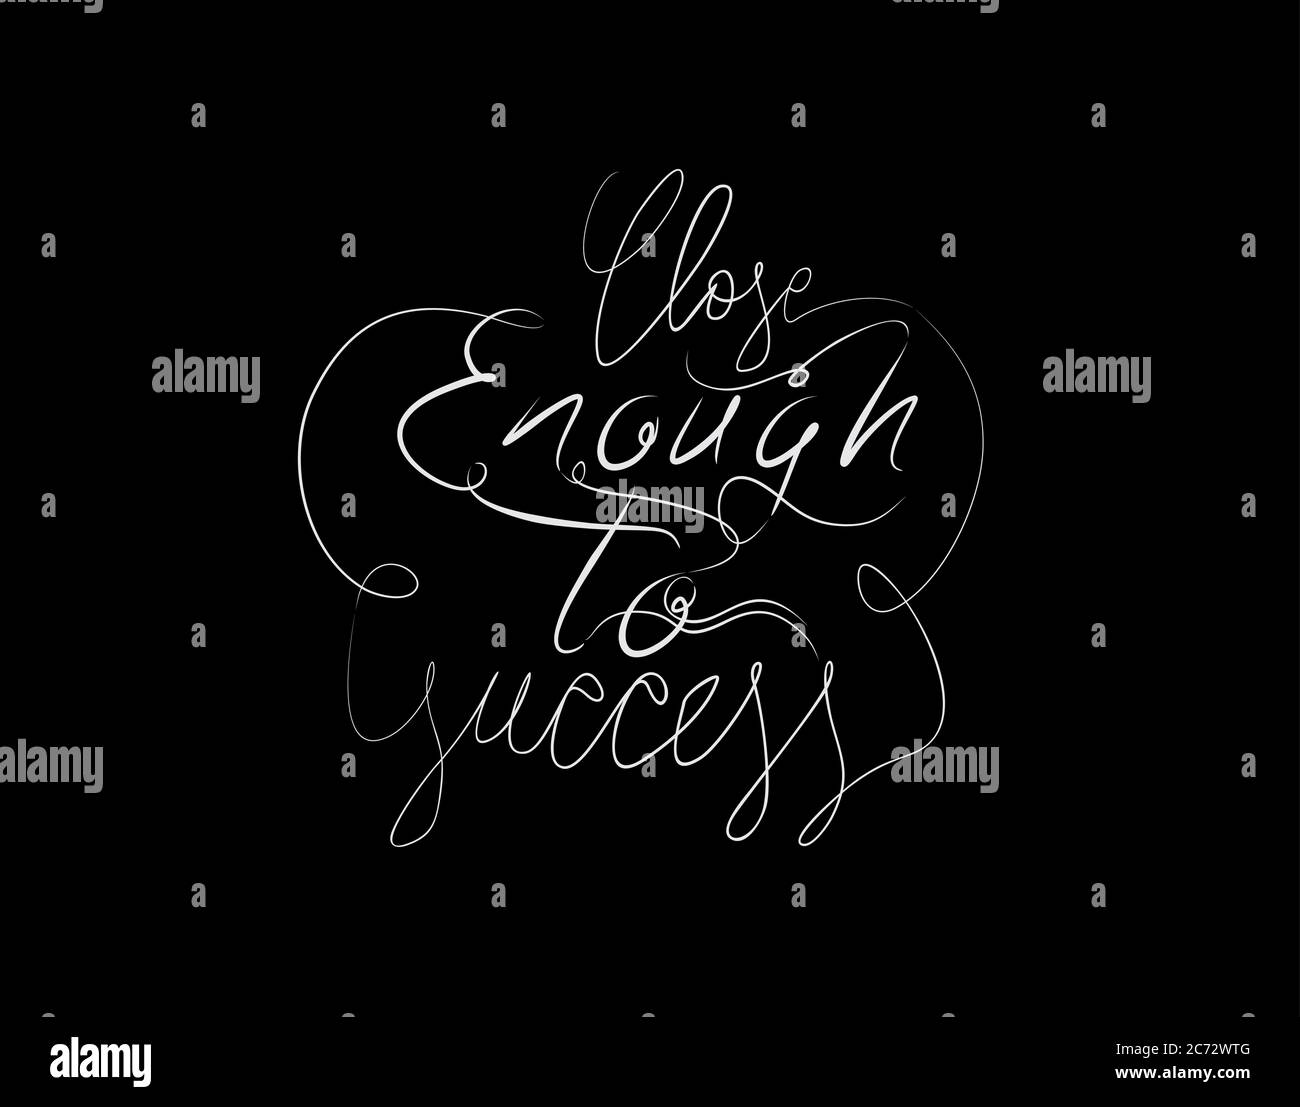 Close Enough To Success Lettering Text on Black background in vector illustration Stock Vector